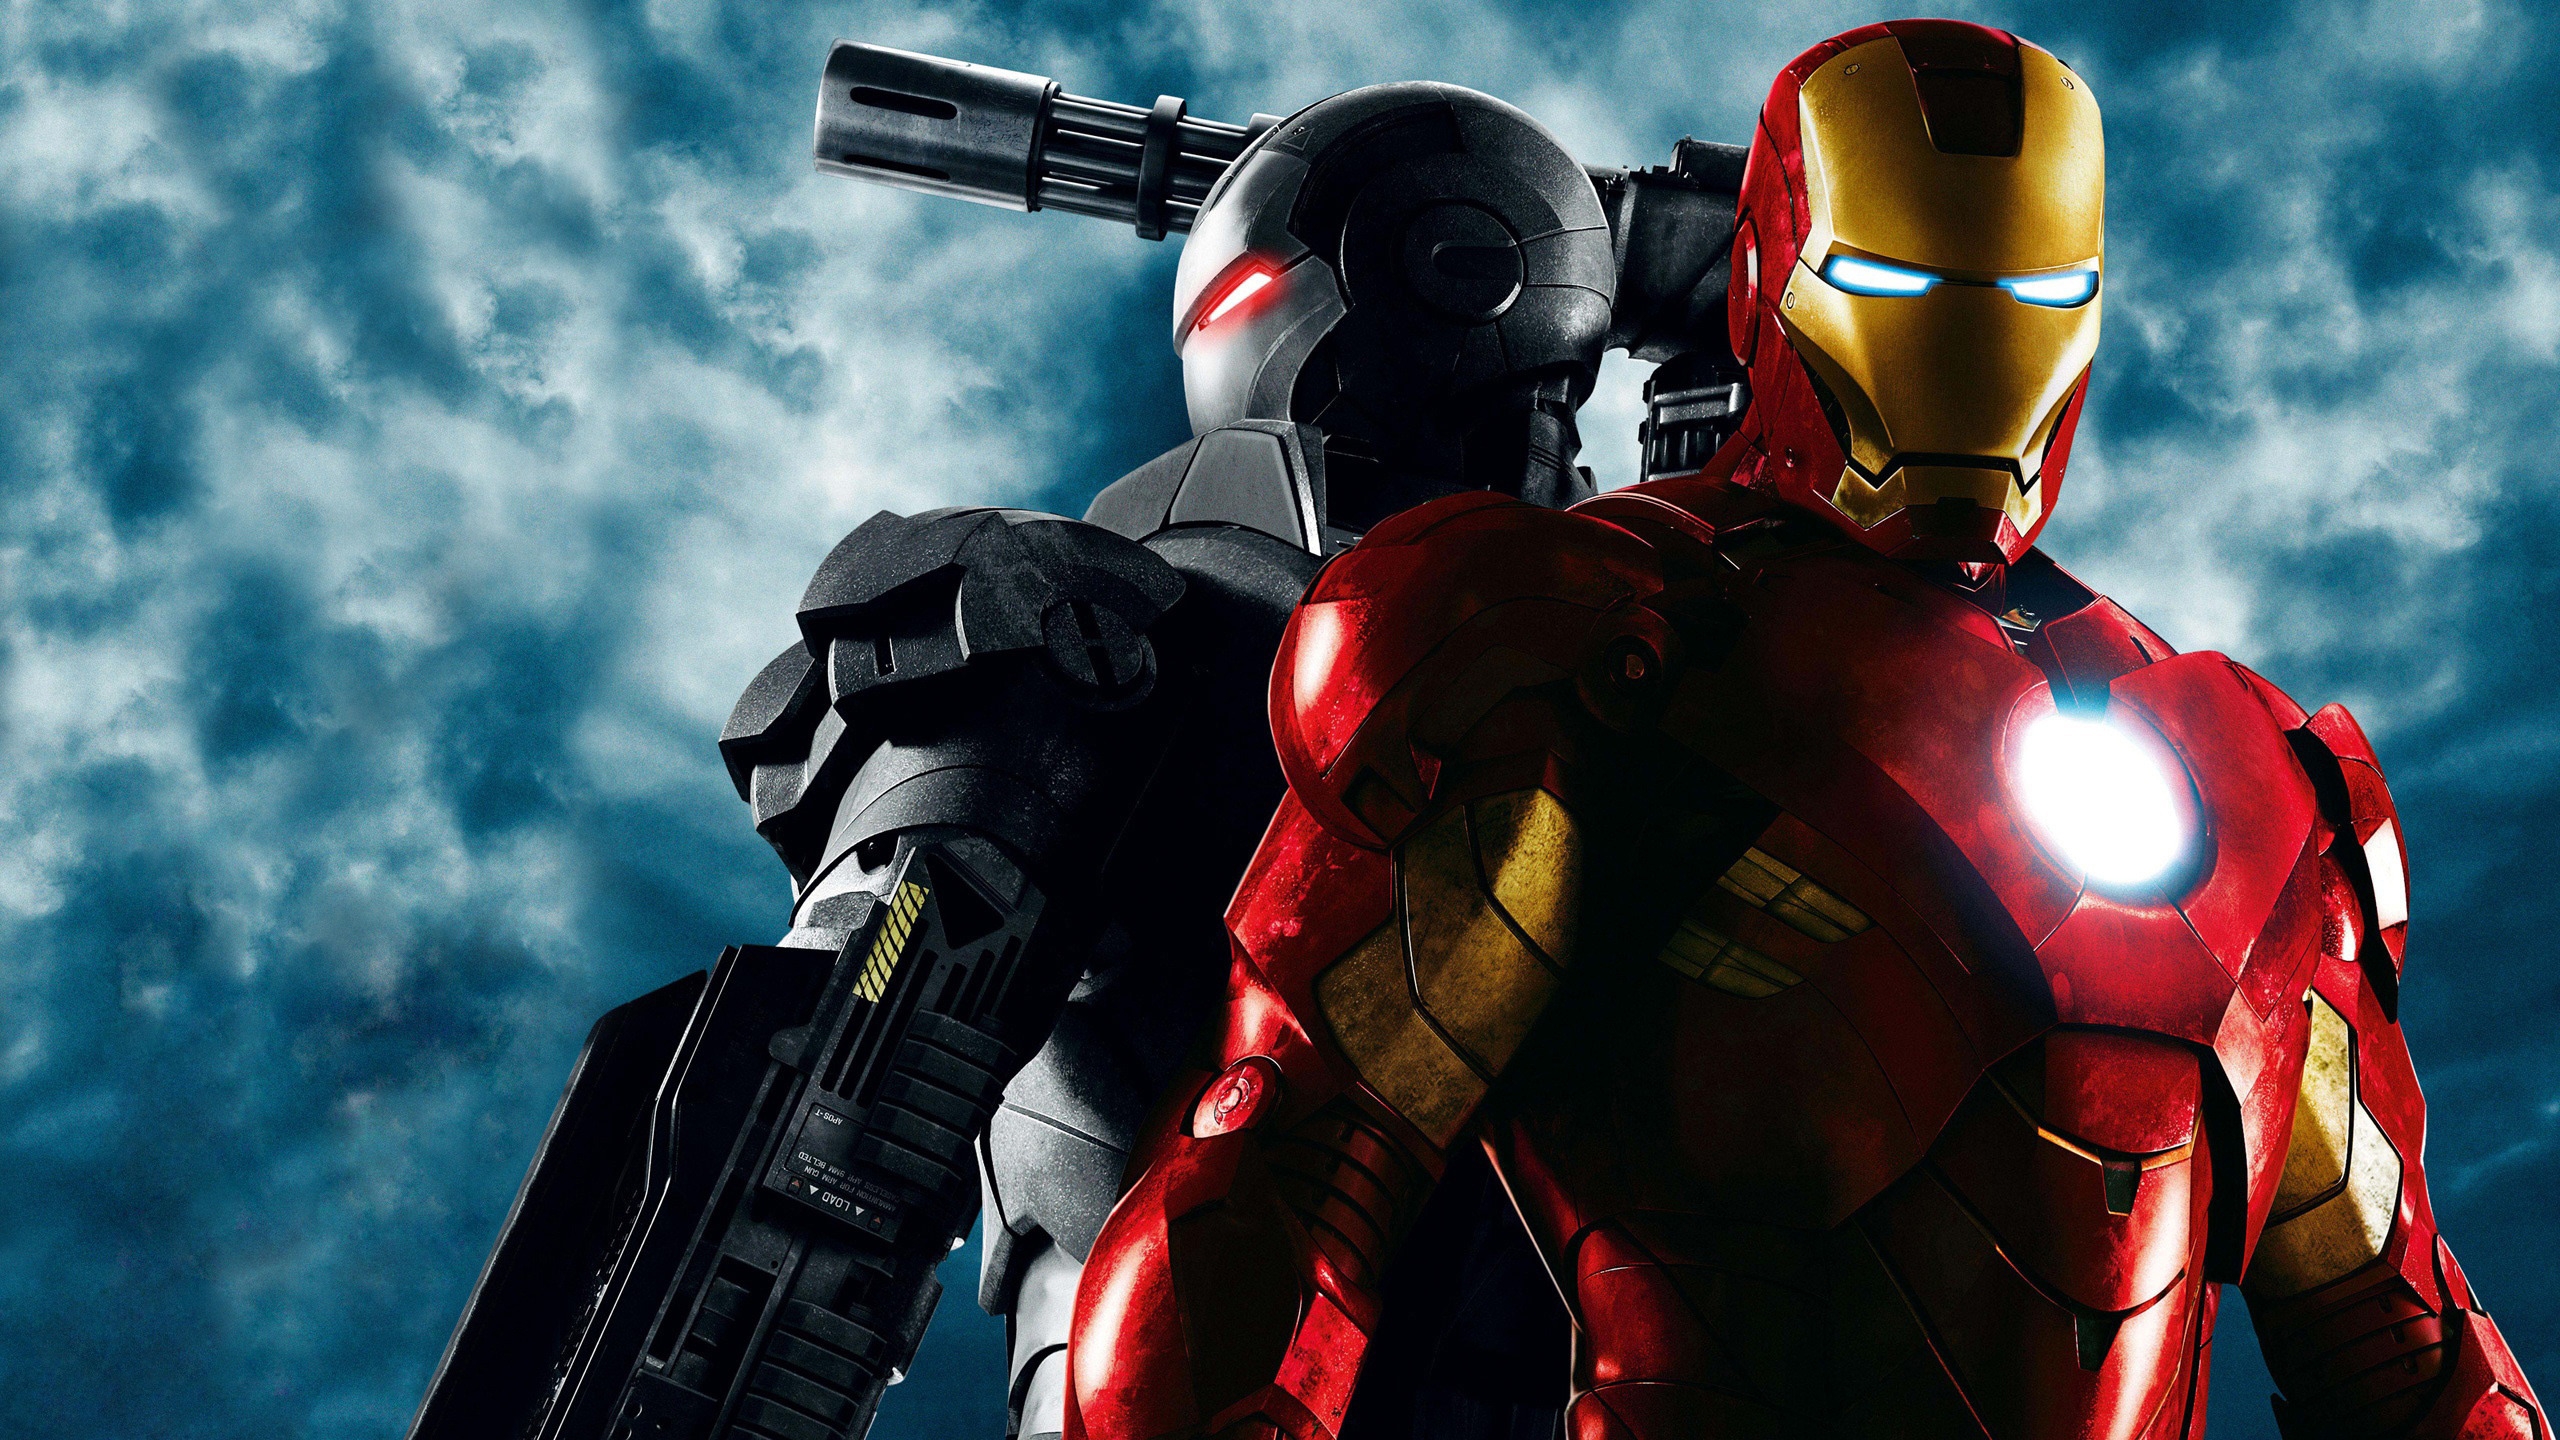 Iron Man 2 Poster for 2560x1440 HDTV resolution